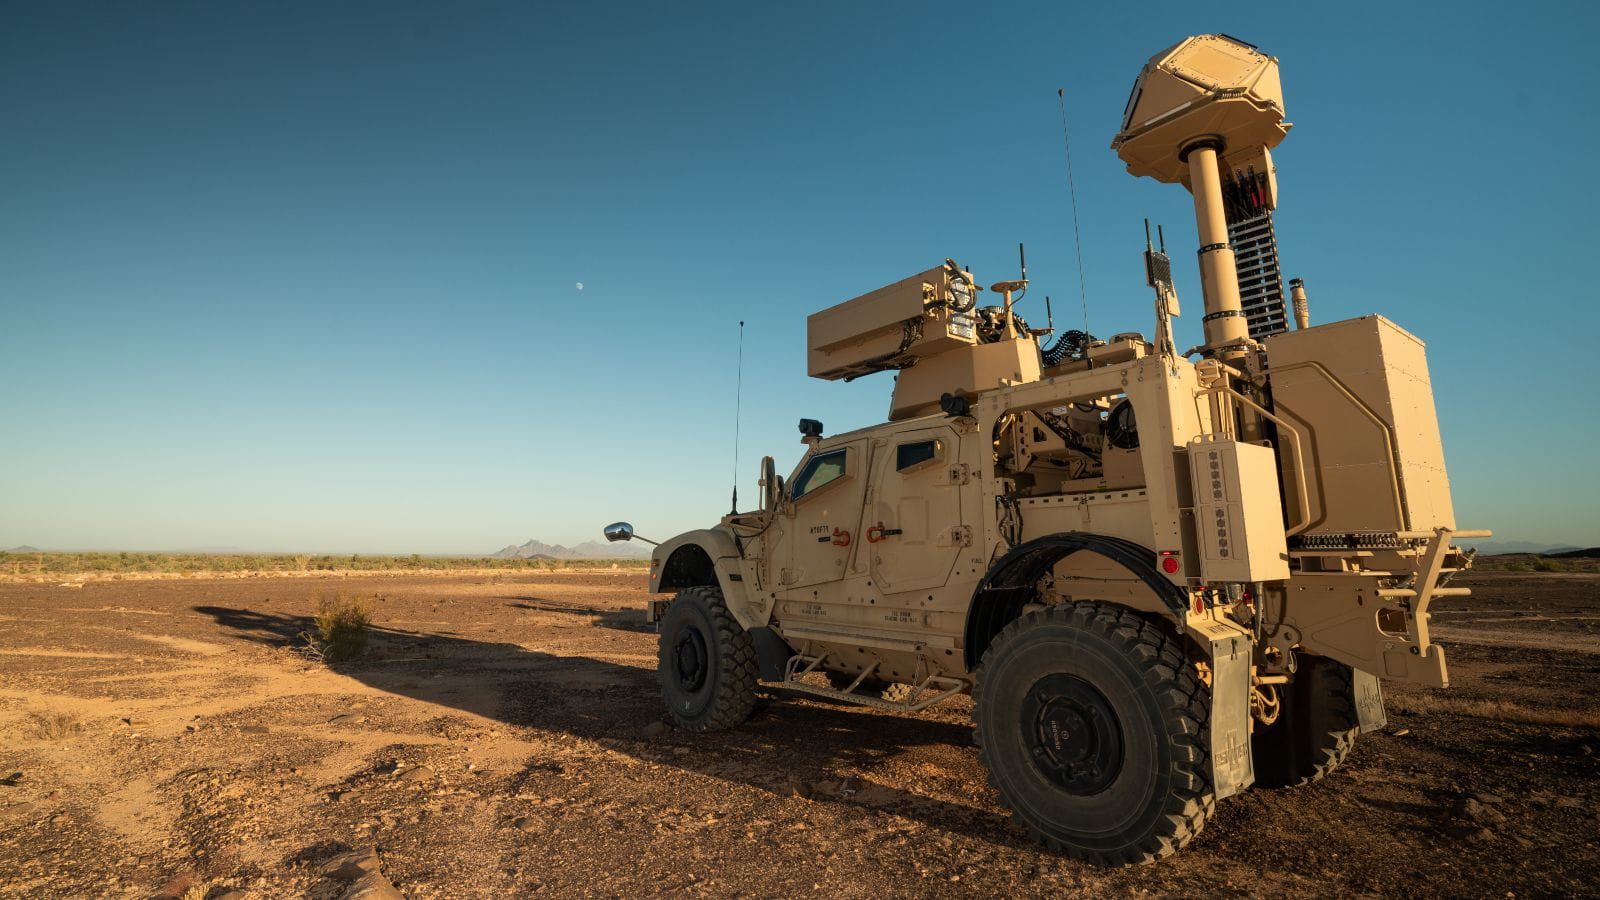 The Ku-band Radio Frequency System, or KuRFS, is a precision 360 degree, multi-mission radar ideally suited for Counter-UAS missions.